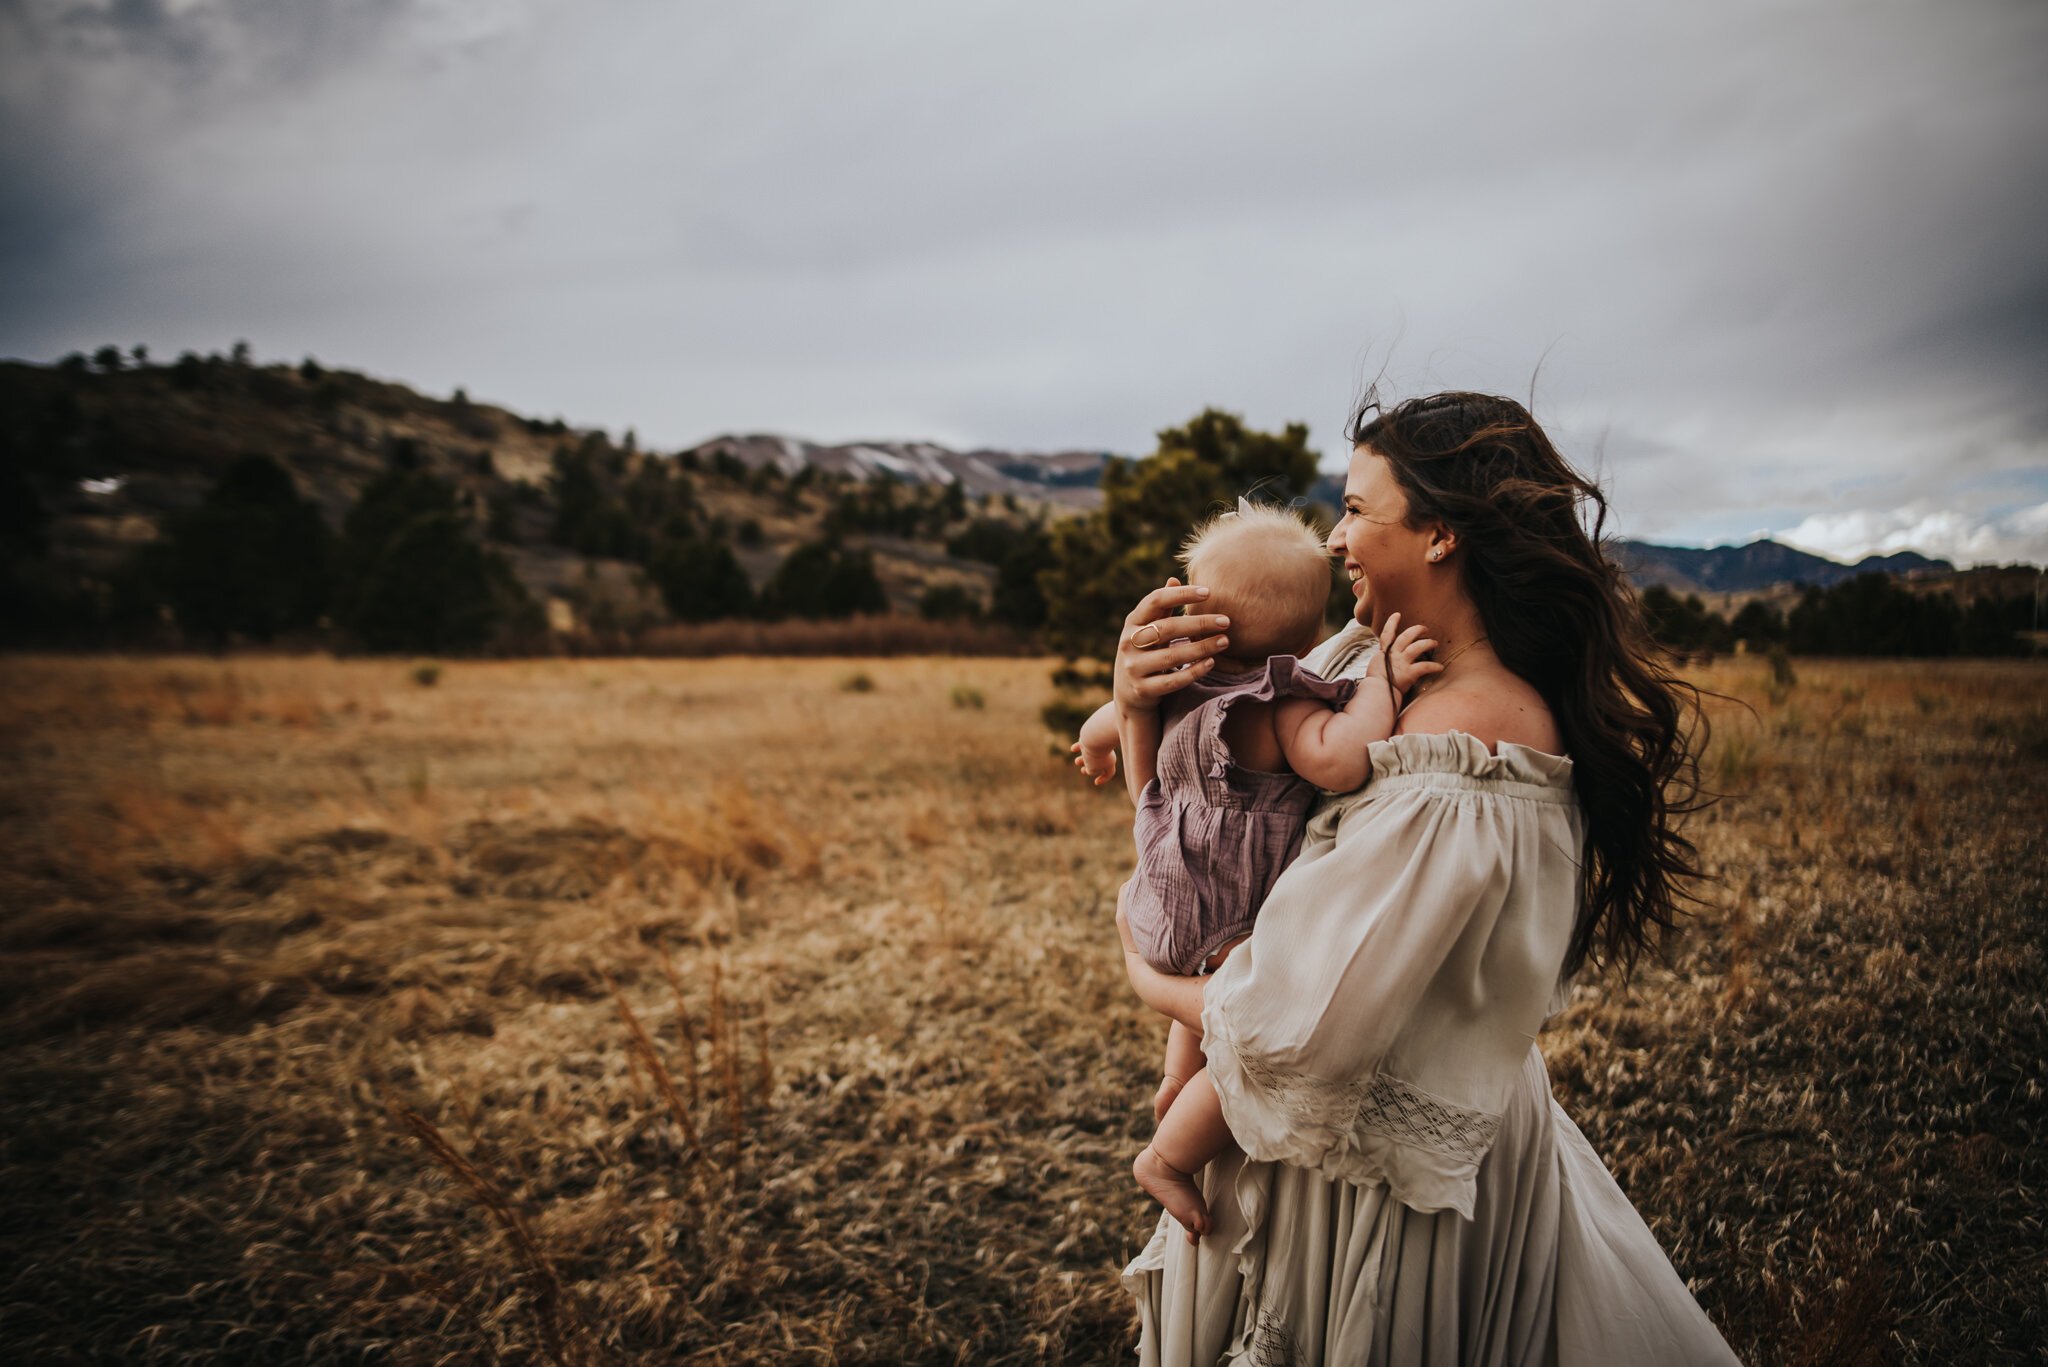 Miller+Family+Session+Mentorship+Colorado+Springs+Colorado+Sunset+Ute+Valley+Park+Mountains+Fields+Mom+Dad+Son+Daughter+Baby+Wild+Prairie+Photography-10-2020.jpeg